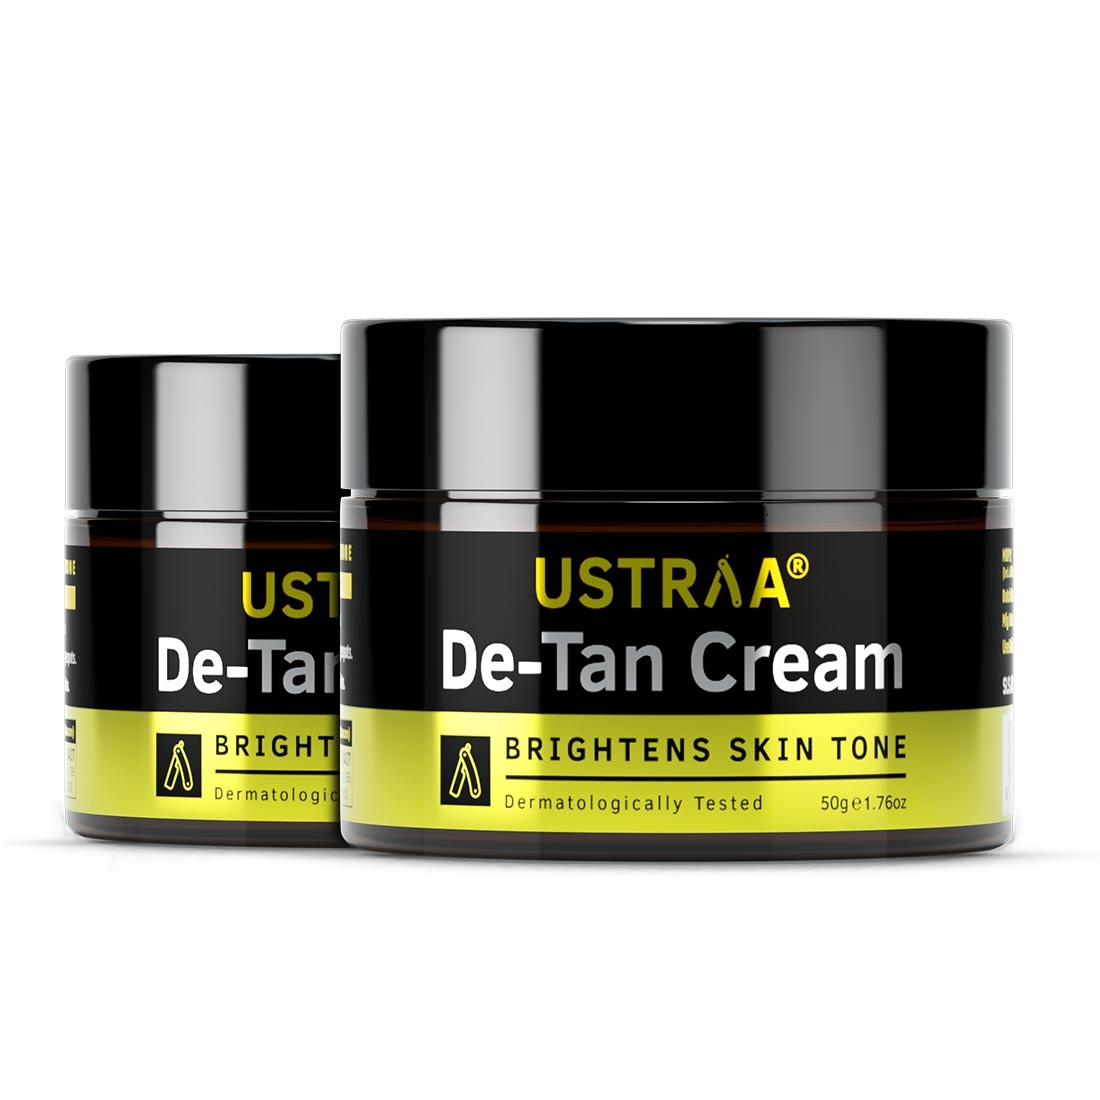 USTRAA De-Tan Cream for Men - 50g - For Men - Tan removal and Even Skin tone, WITHOUT BLEACH, No sulphate, No Paraben, Prevents Dark Spots, With Japanese Yuzu and Liquorice